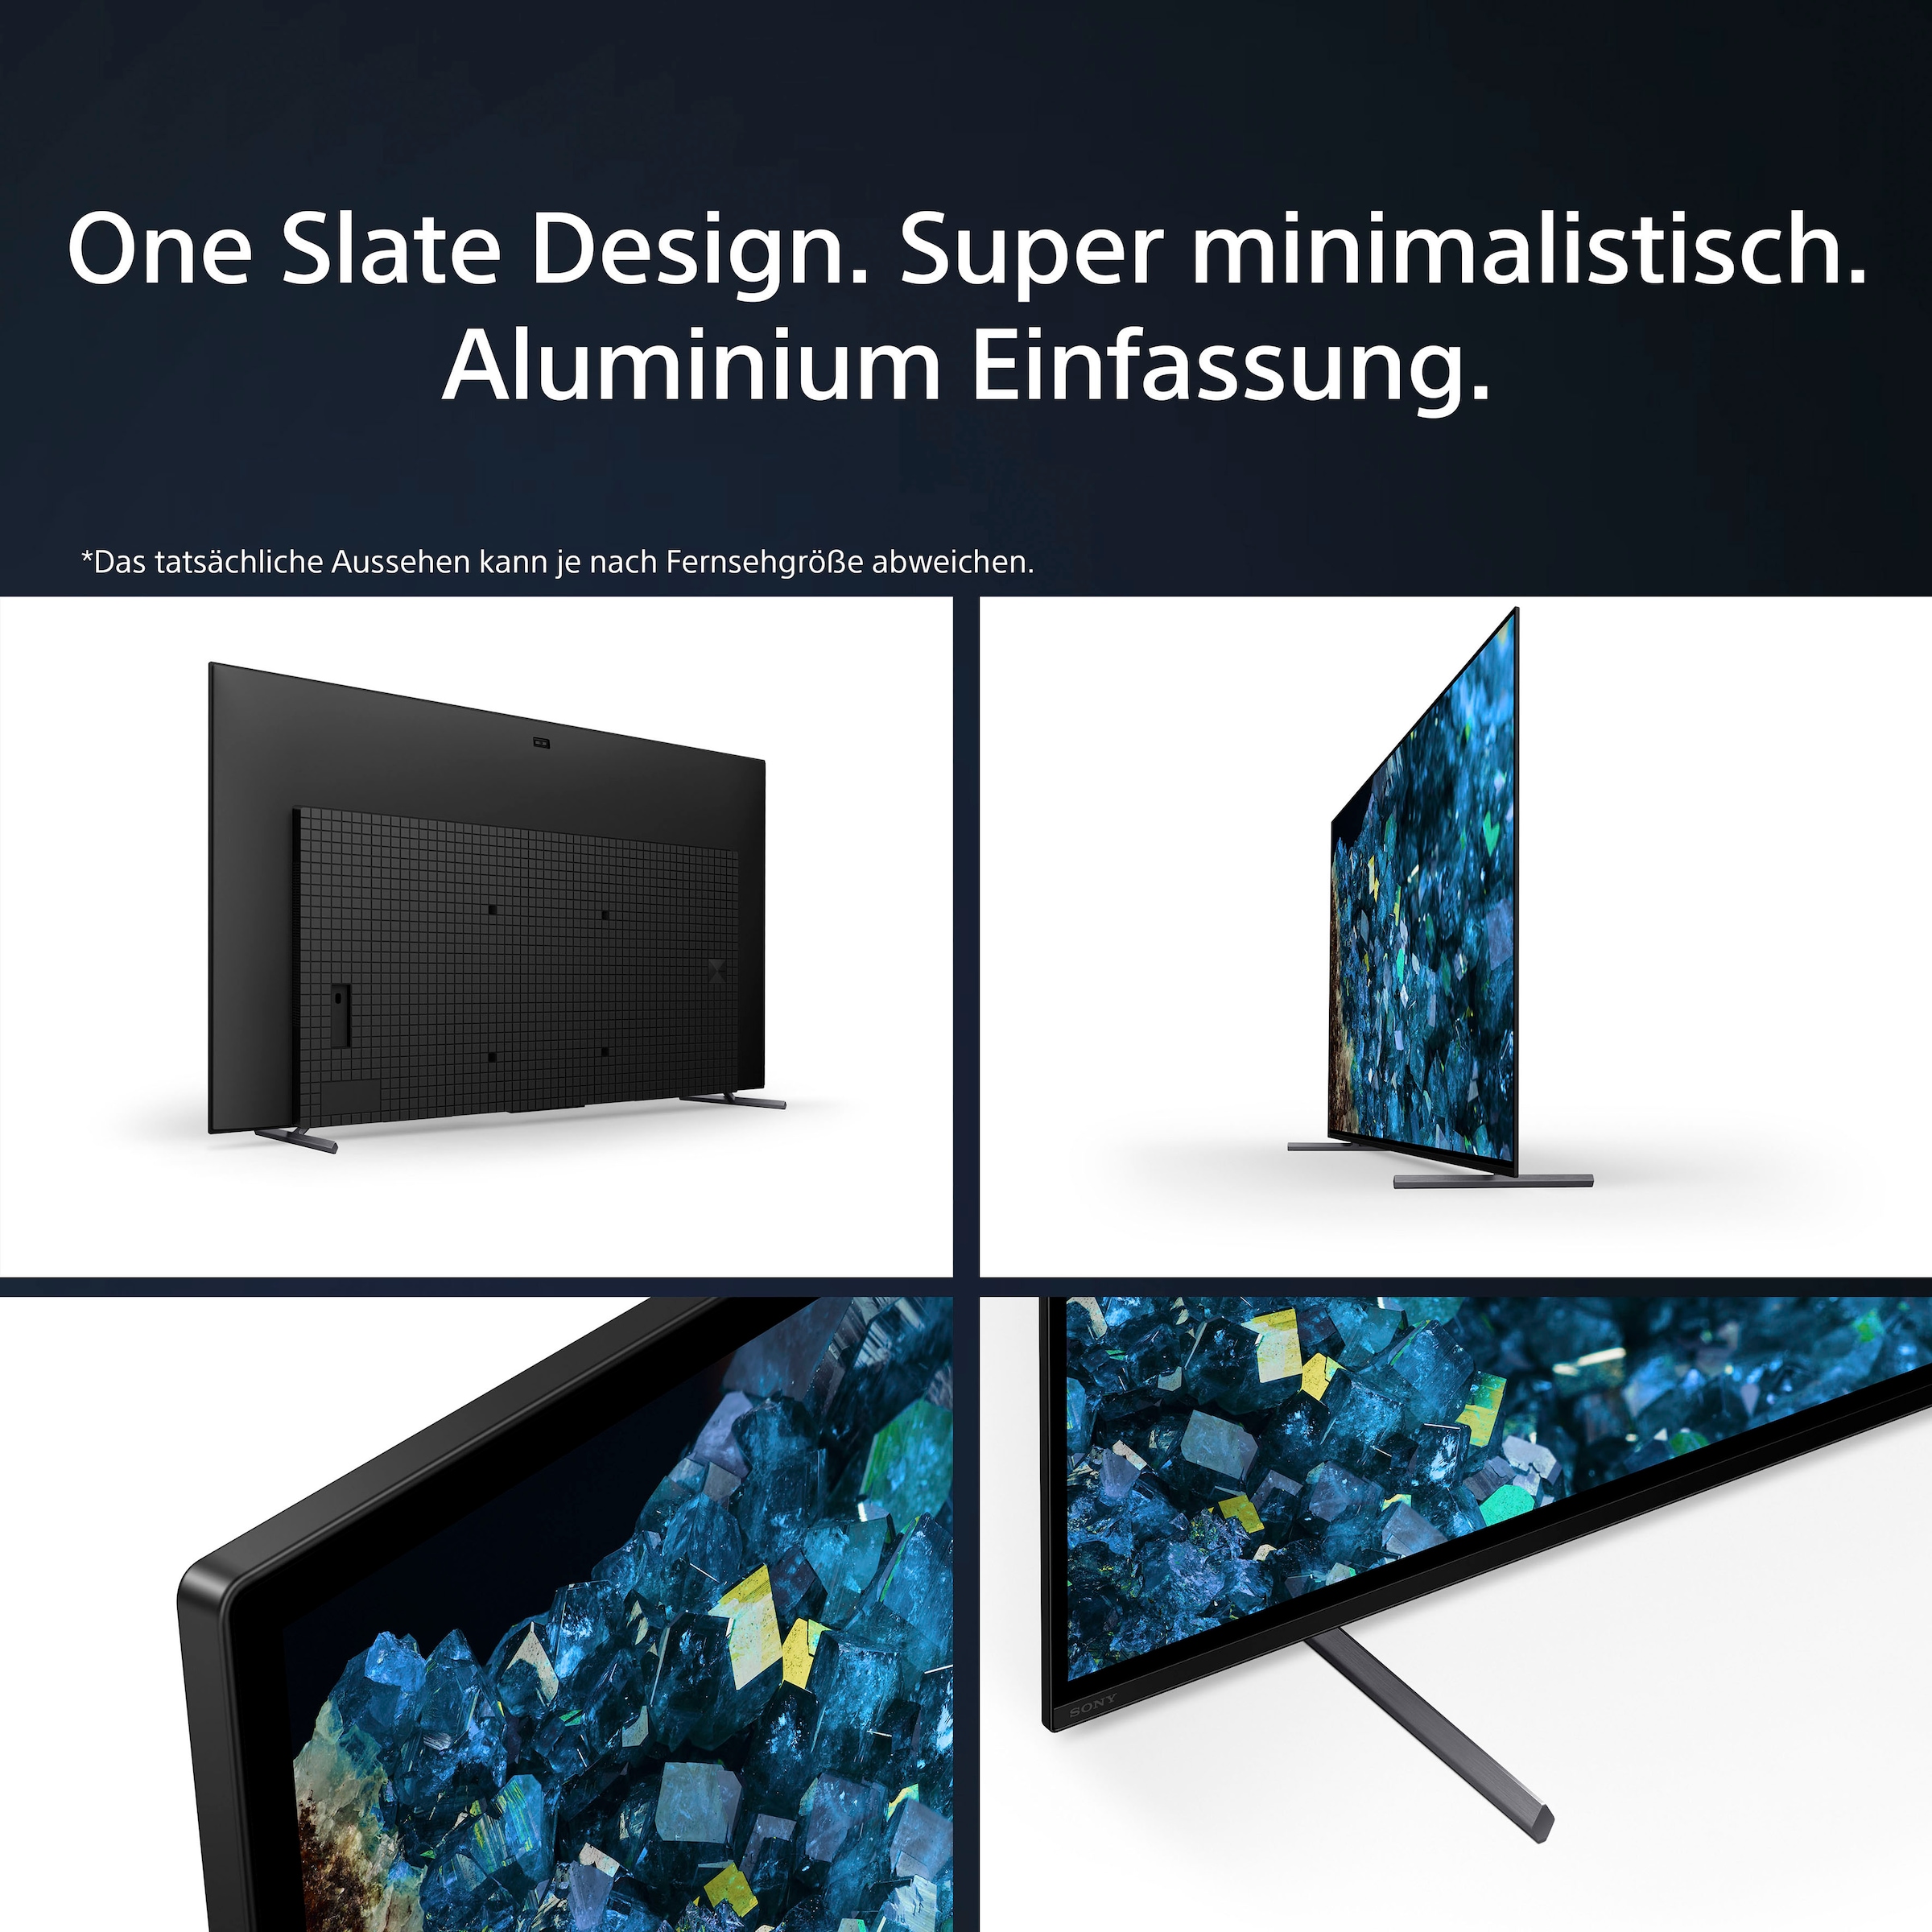 Sony OLED-Fernseher, 210 cm/83 Zoll, 4K Ultra HD, Google TV-Smart-TV-Android TV, Smart-TV, TRILUMINOS PRO, BRAVIA CORE, mit exklusiven PS5-Features